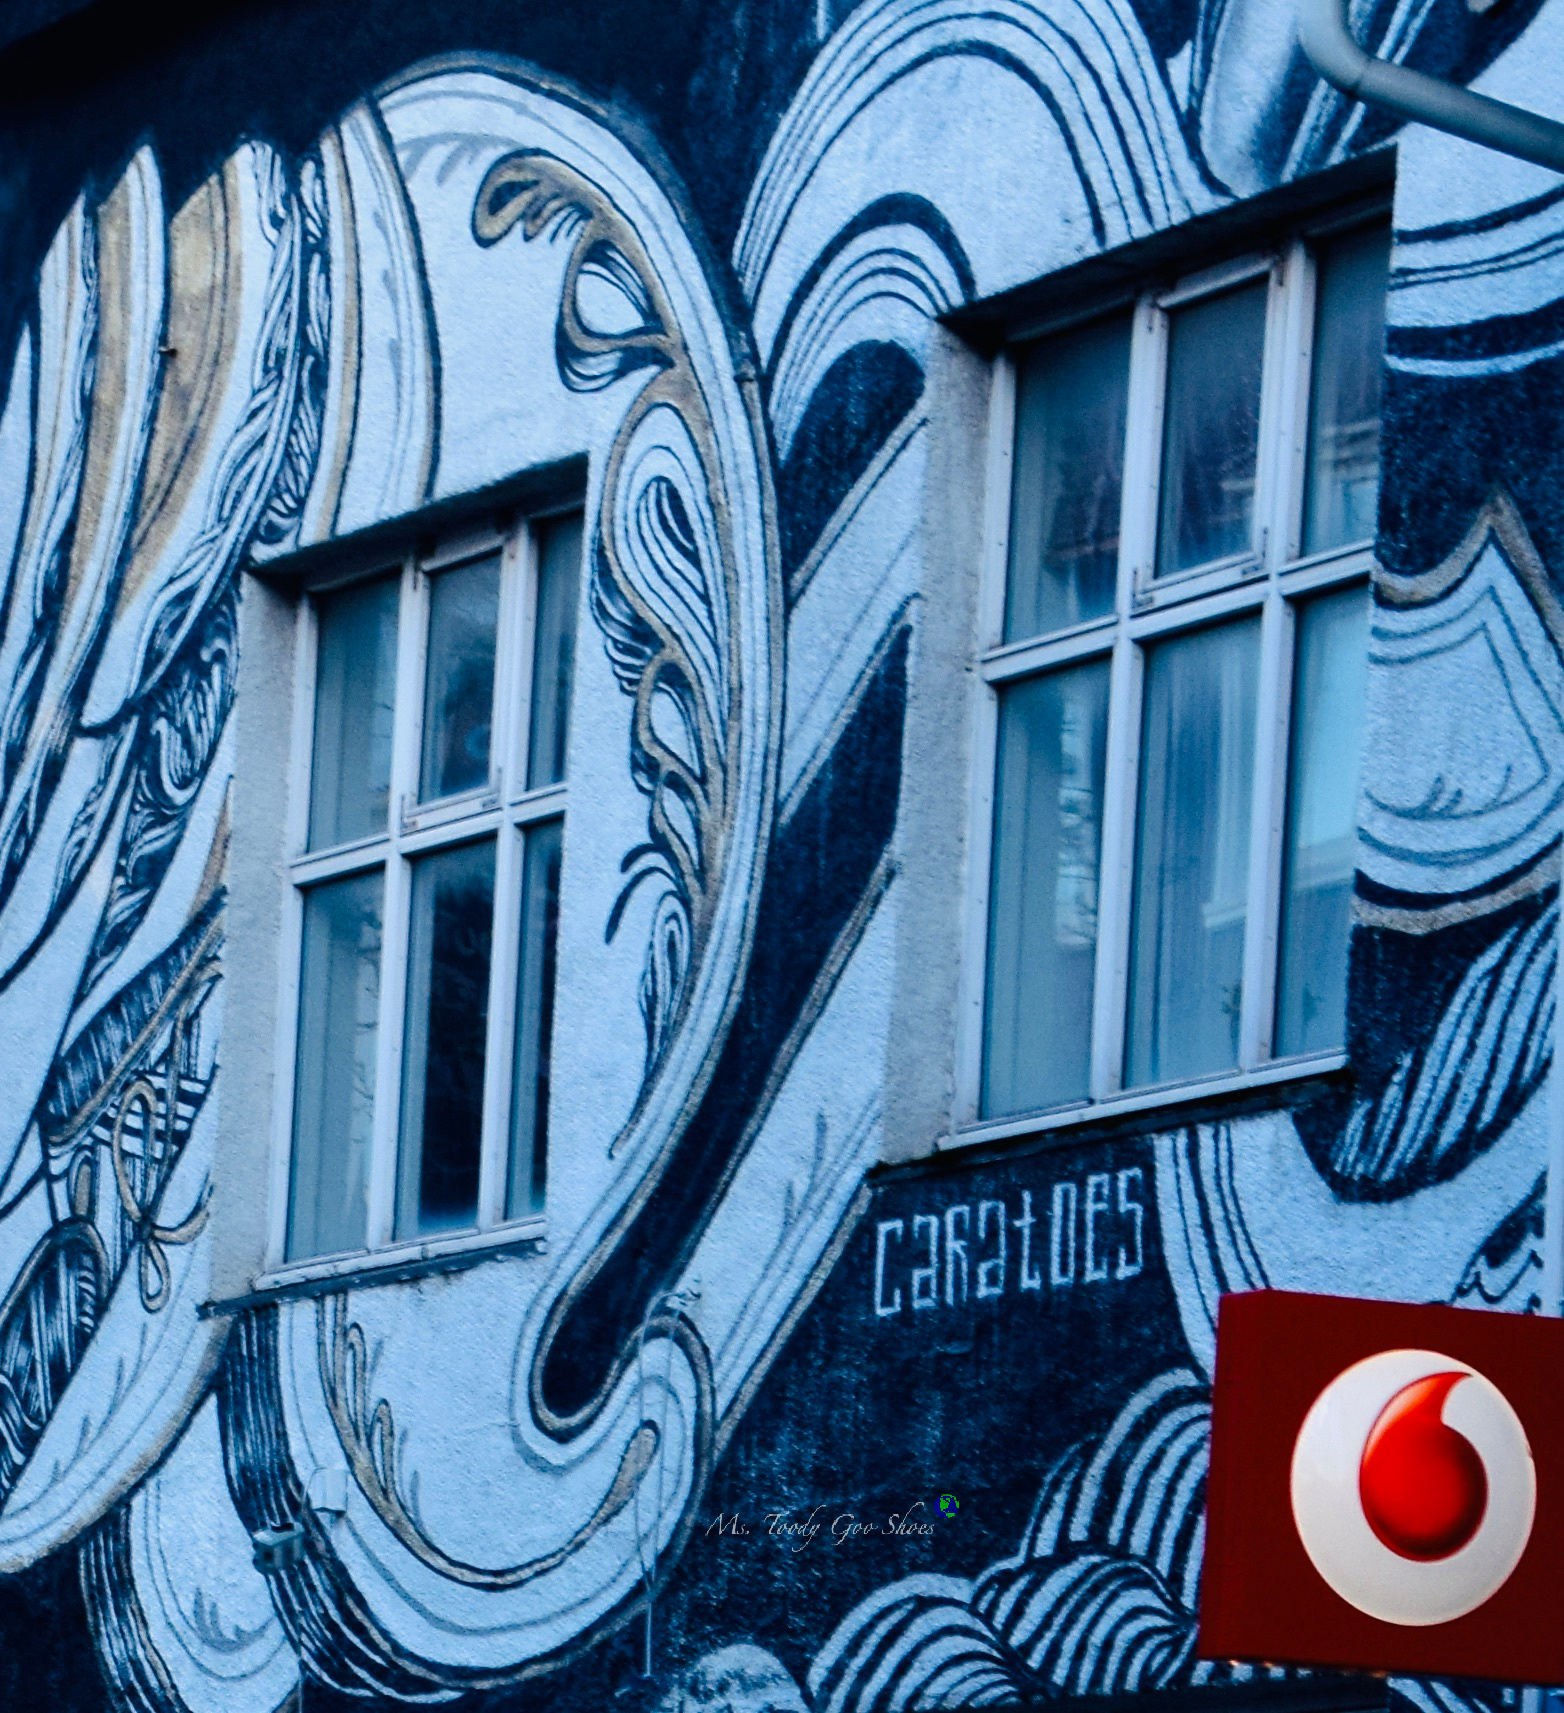 "Ode To Mother" is the most famous mural in Reykjavik, Iceland | Ms. Toody Goo Shoes